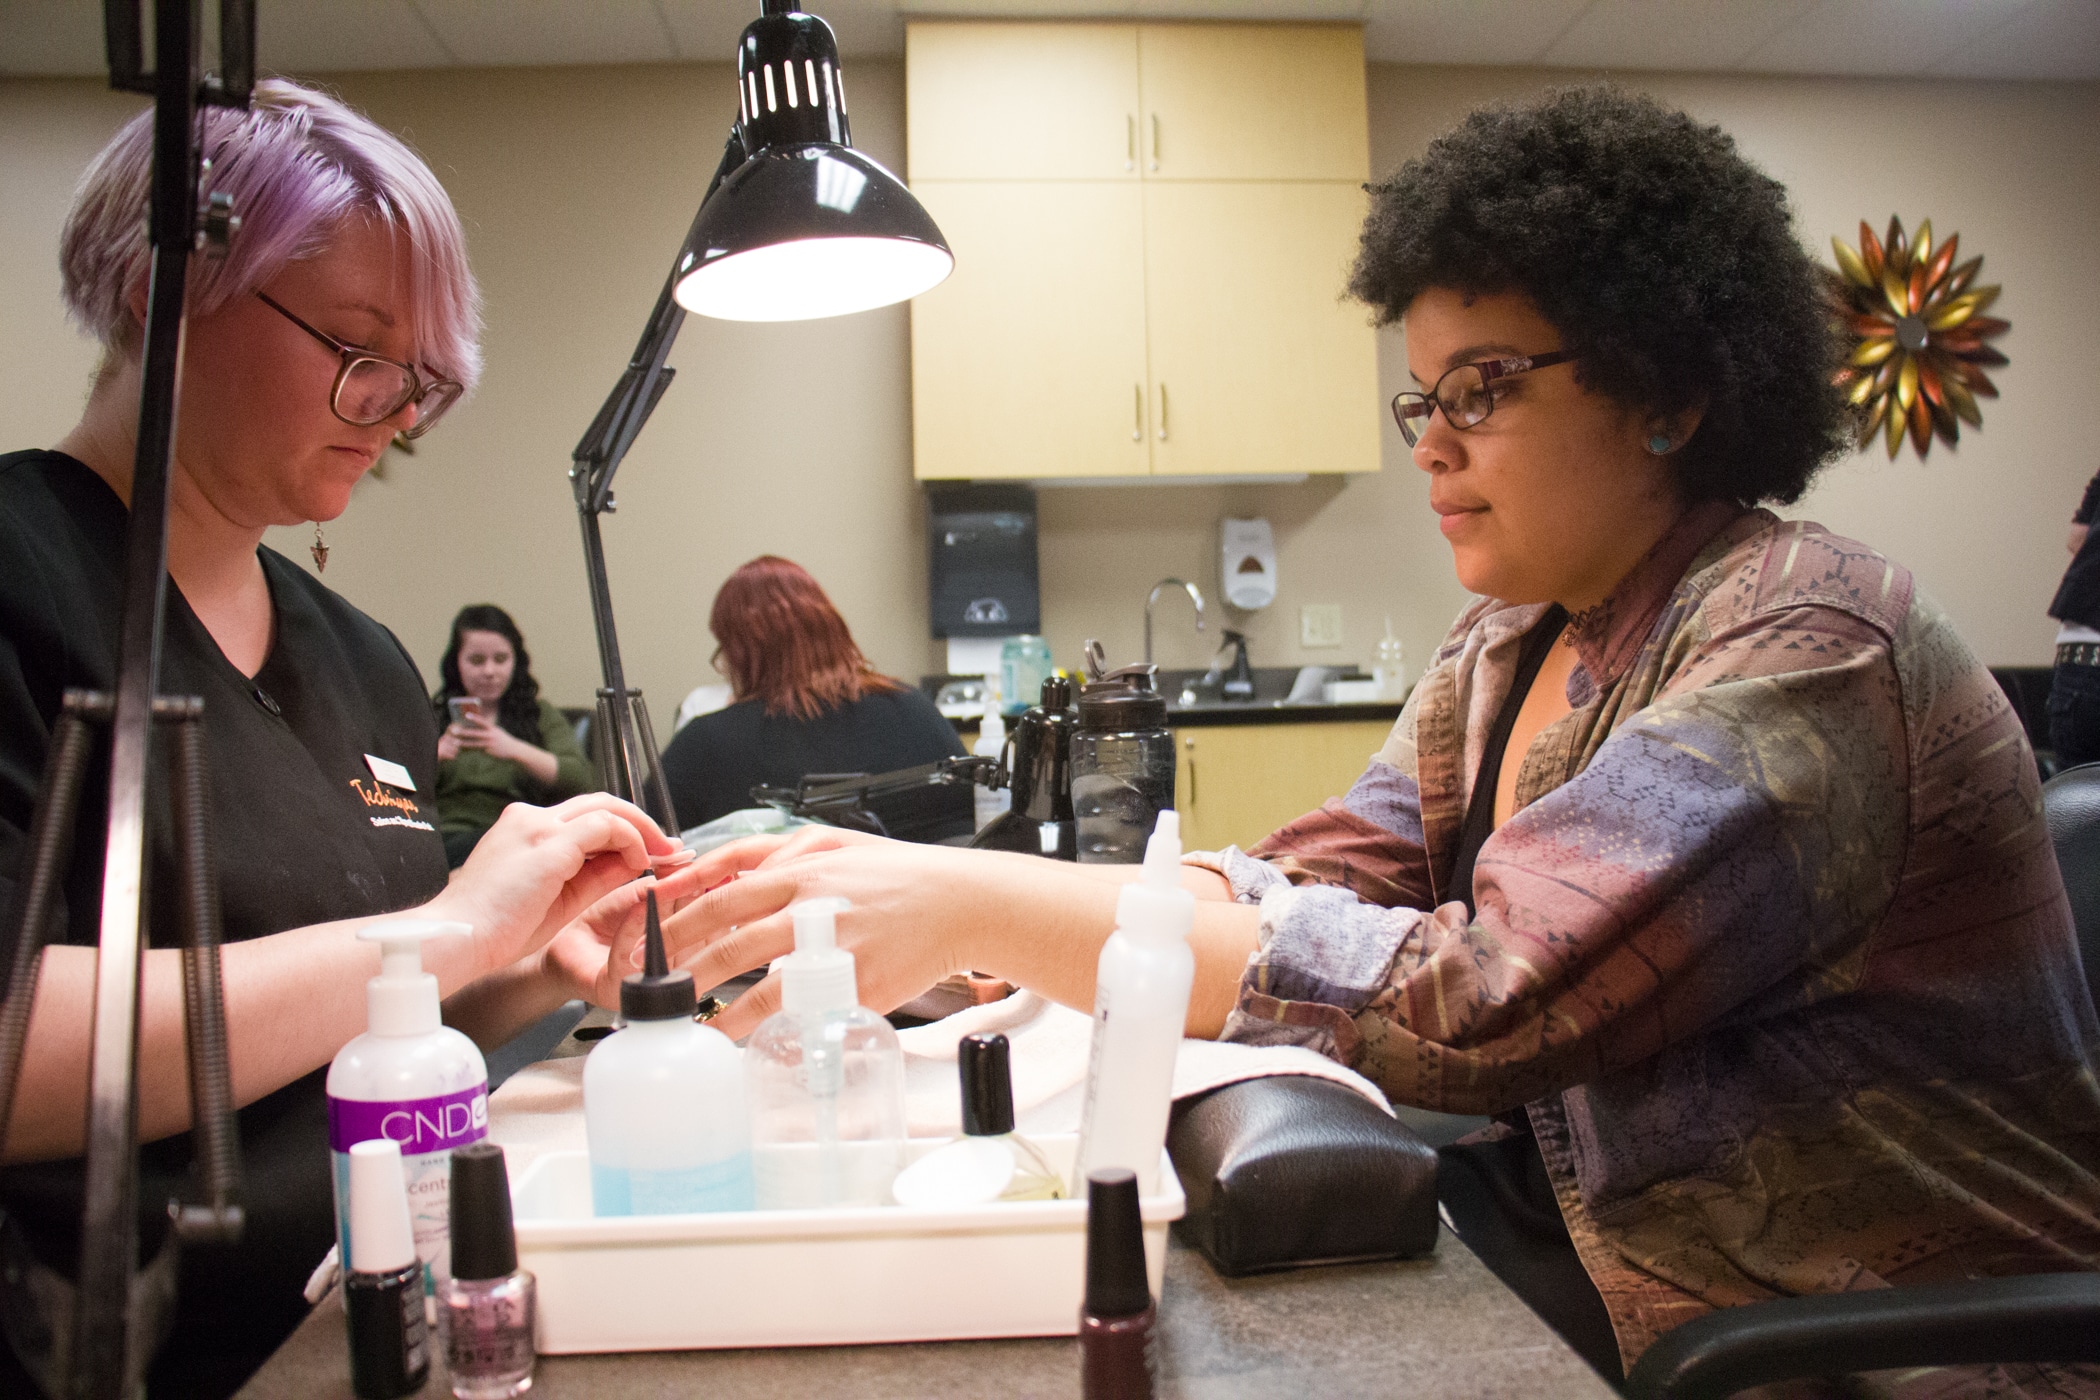 Cosmetology student giving manicure to client